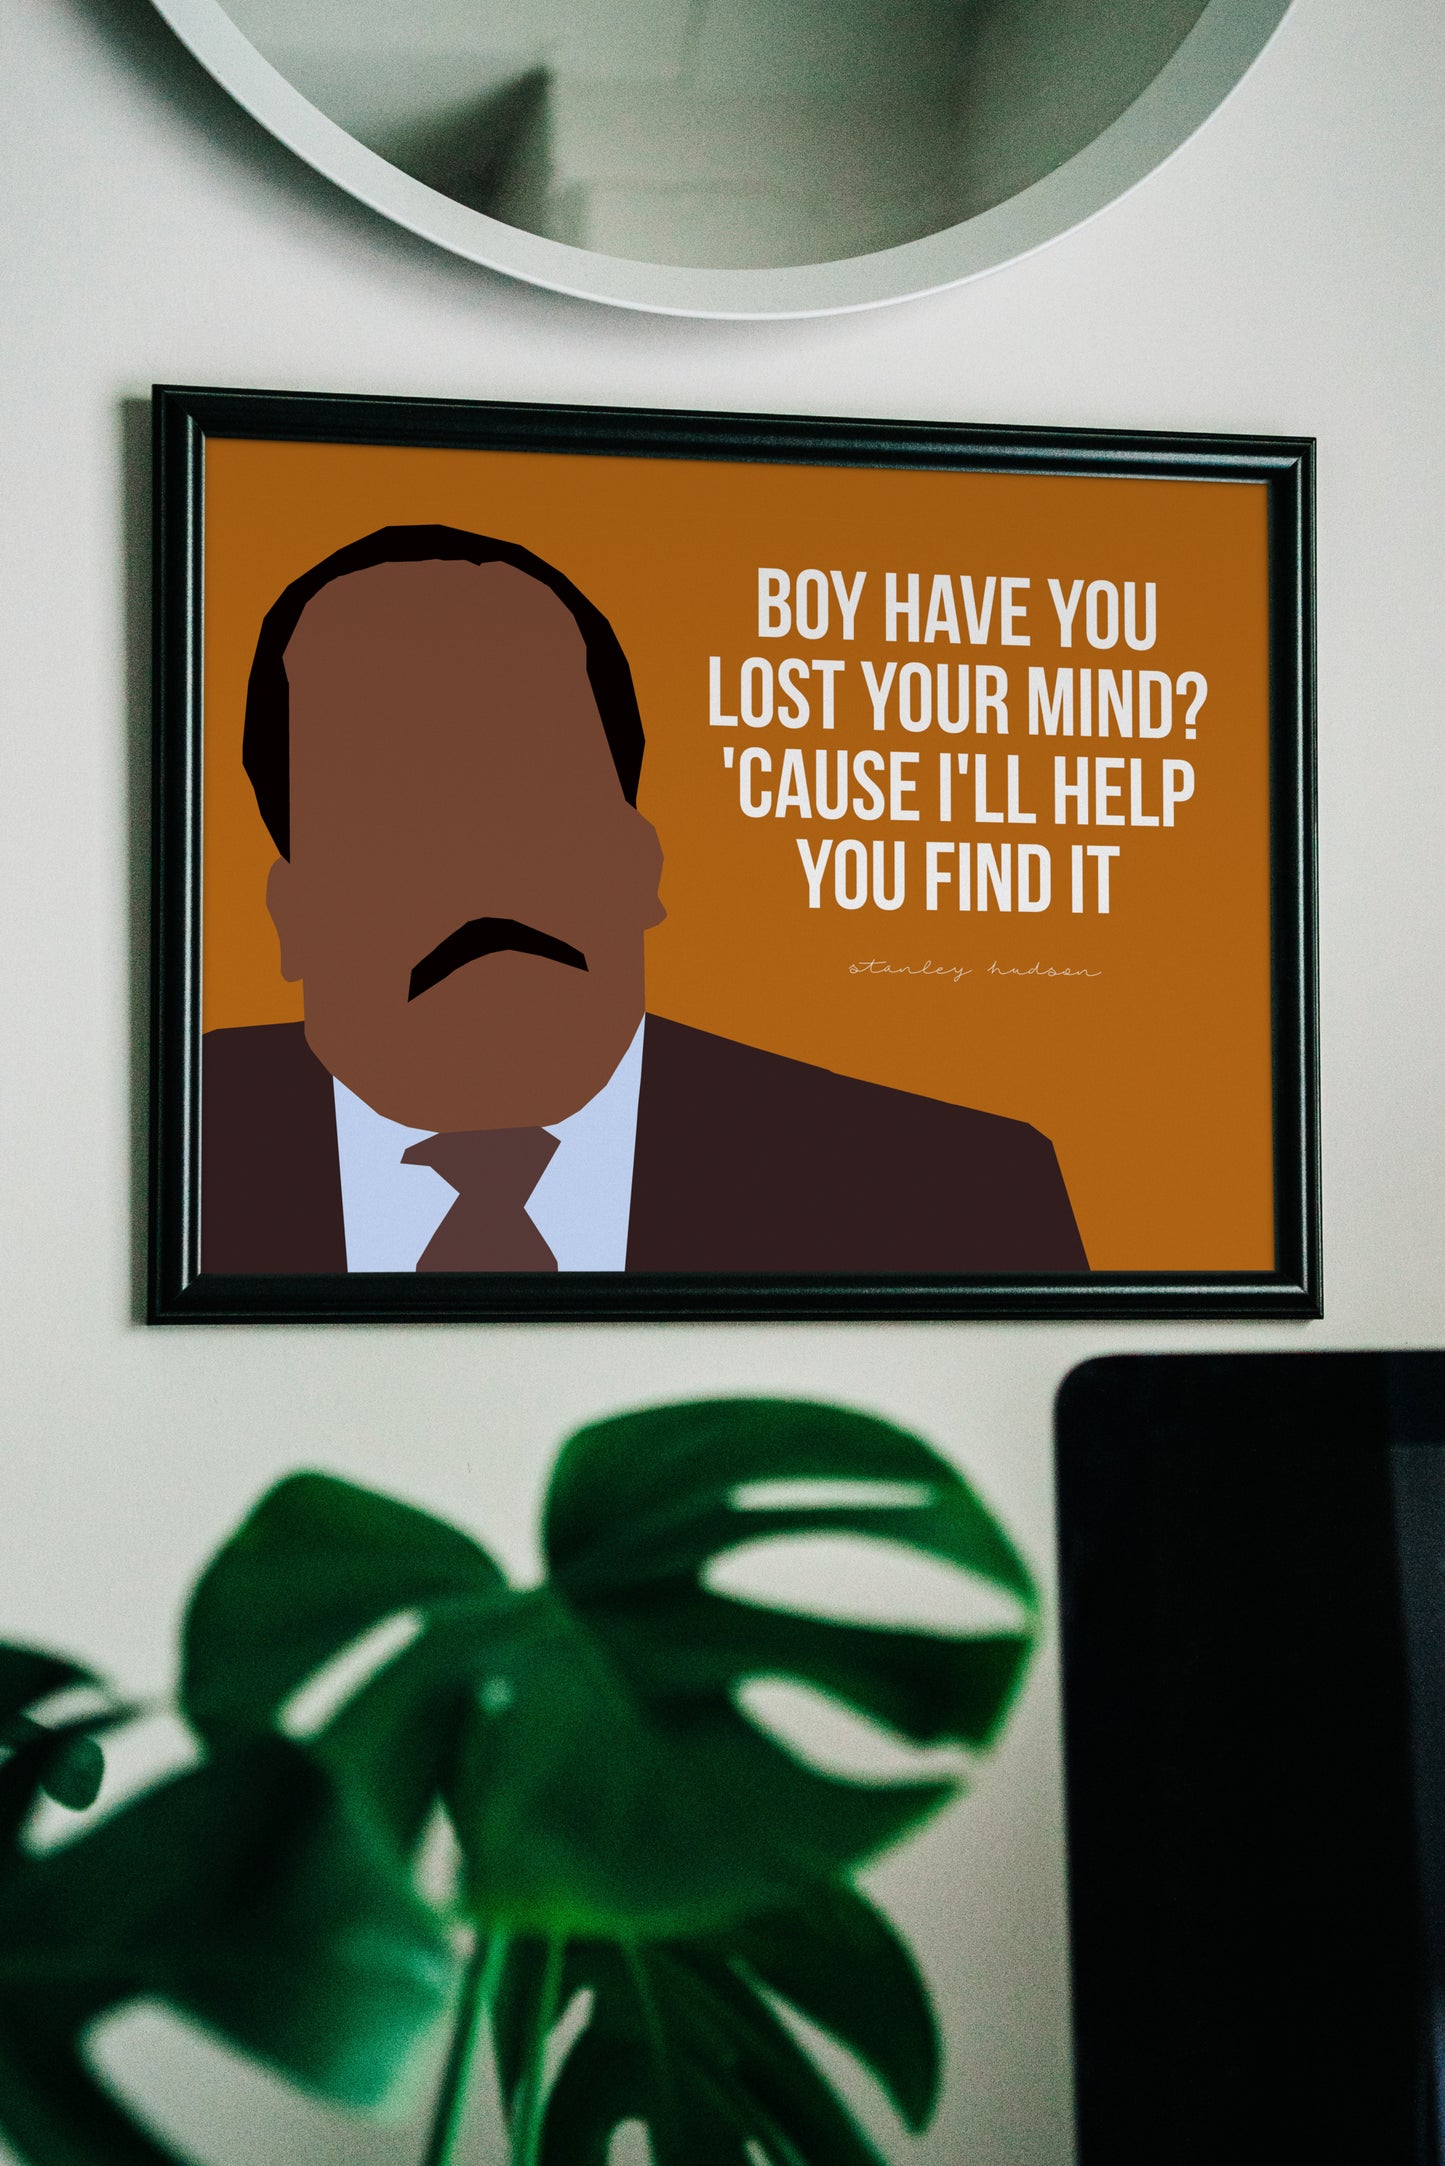 The Office Poster | Stanley Hudson "Have You Lost Your Mind?"